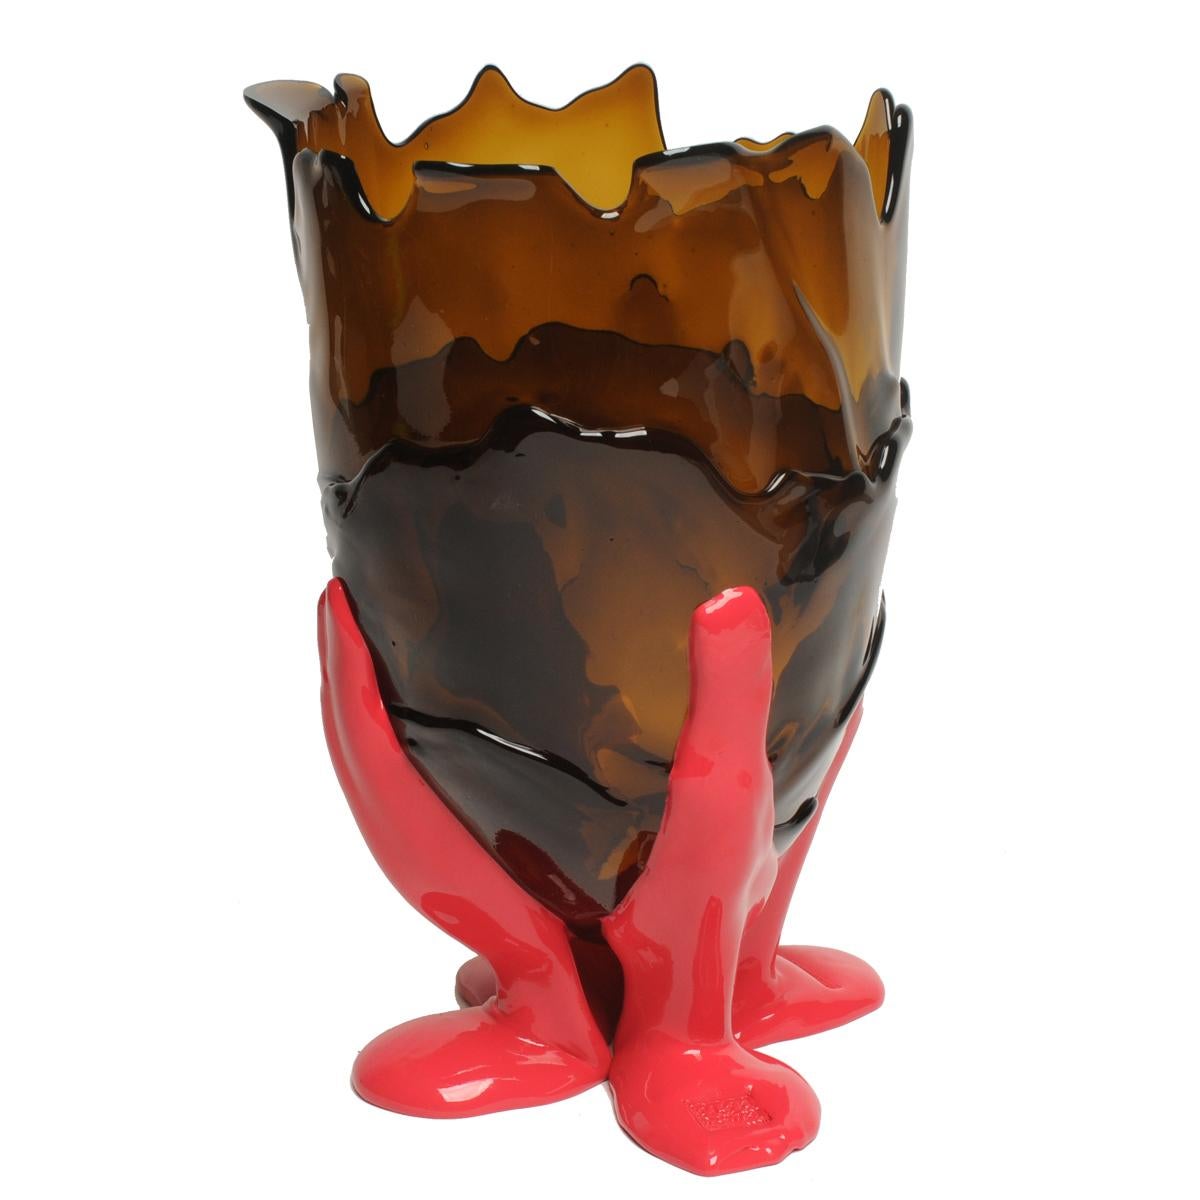 Clear extra colour vase - clear brown, matt fuchsia
Vase in soft resin designed by Gaetano Pesce in 1995 for Fish Design collection.

Measures: L Ø 22cm x H 36cm
Colours: clear brown, matt fuchsia
Other sizes available.
Vase in soft resin